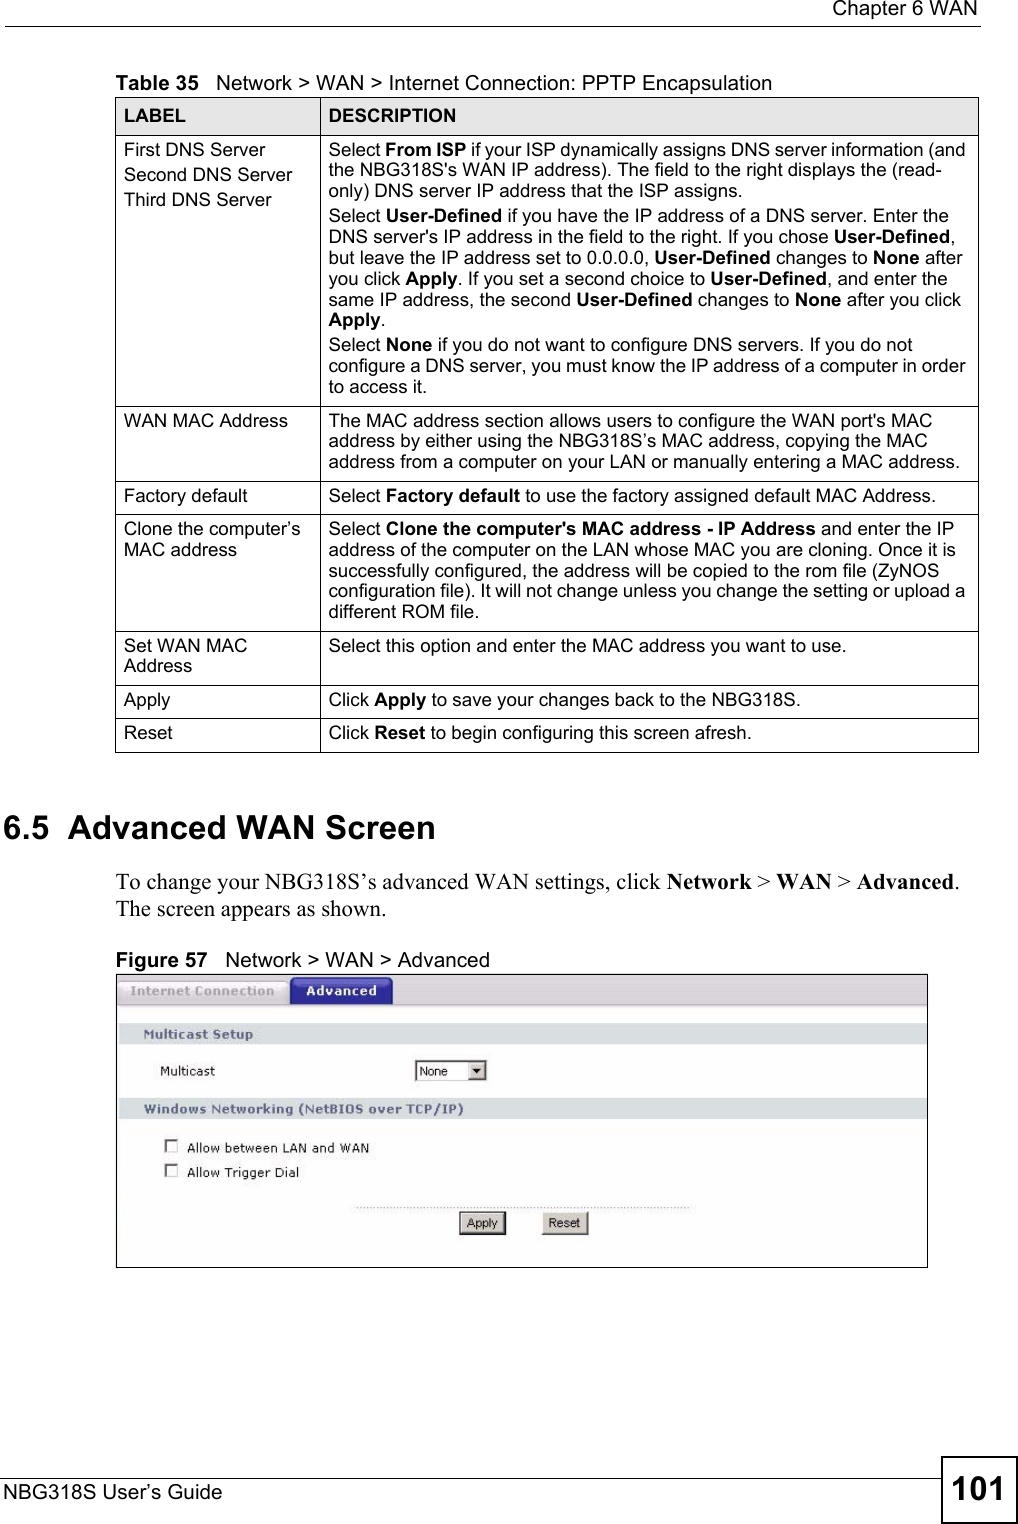  Chapter 6 WANNBG318S User’s Guide 1016.5  Advanced WAN ScreenTo change your NBG318S’s advanced WAN settings, click Network &gt; WAN &gt; Advanced. The screen appears as shown.Figure 57   Network &gt; WAN &gt; Advanced First DNS ServerSecond DNS ServerThird DNS Server Select From ISP if your ISP dynamically assigns DNS server information (and the NBG318S&apos;s WAN IP address). The field to the right displays the (read-only) DNS server IP address that the ISP assigns. Select User-Defined if you have the IP address of a DNS server. Enter the DNS server&apos;s IP address in the field to the right. If you chose User-Defined, but leave the IP address set to 0.0.0.0, User-Defined changes to None after you click Apply. If you set a second choice to User-Defined, and enter the same IP address, the second User-Defined changes to None after you click Apply. Select None if you do not want to configure DNS servers. If you do not configure a DNS server, you must know the IP address of a computer in order to access it.WAN MAC Address The MAC address section allows users to configure the WAN port&apos;s MAC address by either using the NBG318S’s MAC address, copying the MAC address from a computer on your LAN or manually entering a MAC address. Factory default Select Factory default to use the factory assigned default MAC Address.Clone the computer’s MAC addressSelect Clone the computer&apos;s MAC address - IP Address and enter the IP address of the computer on the LAN whose MAC you are cloning. Once it is successfully configured, the address will be copied to the rom file (ZyNOS configuration file). It will not change unless you change the setting or upload a different ROM file. Set WAN MAC AddressSelect this option and enter the MAC address you want to use.Apply Click Apply to save your changes back to the NBG318S.Reset Click Reset to begin configuring this screen afresh.Table 35   Network &gt; WAN &gt; Internet Connection: PPTP EncapsulationLABEL DESCRIPTION